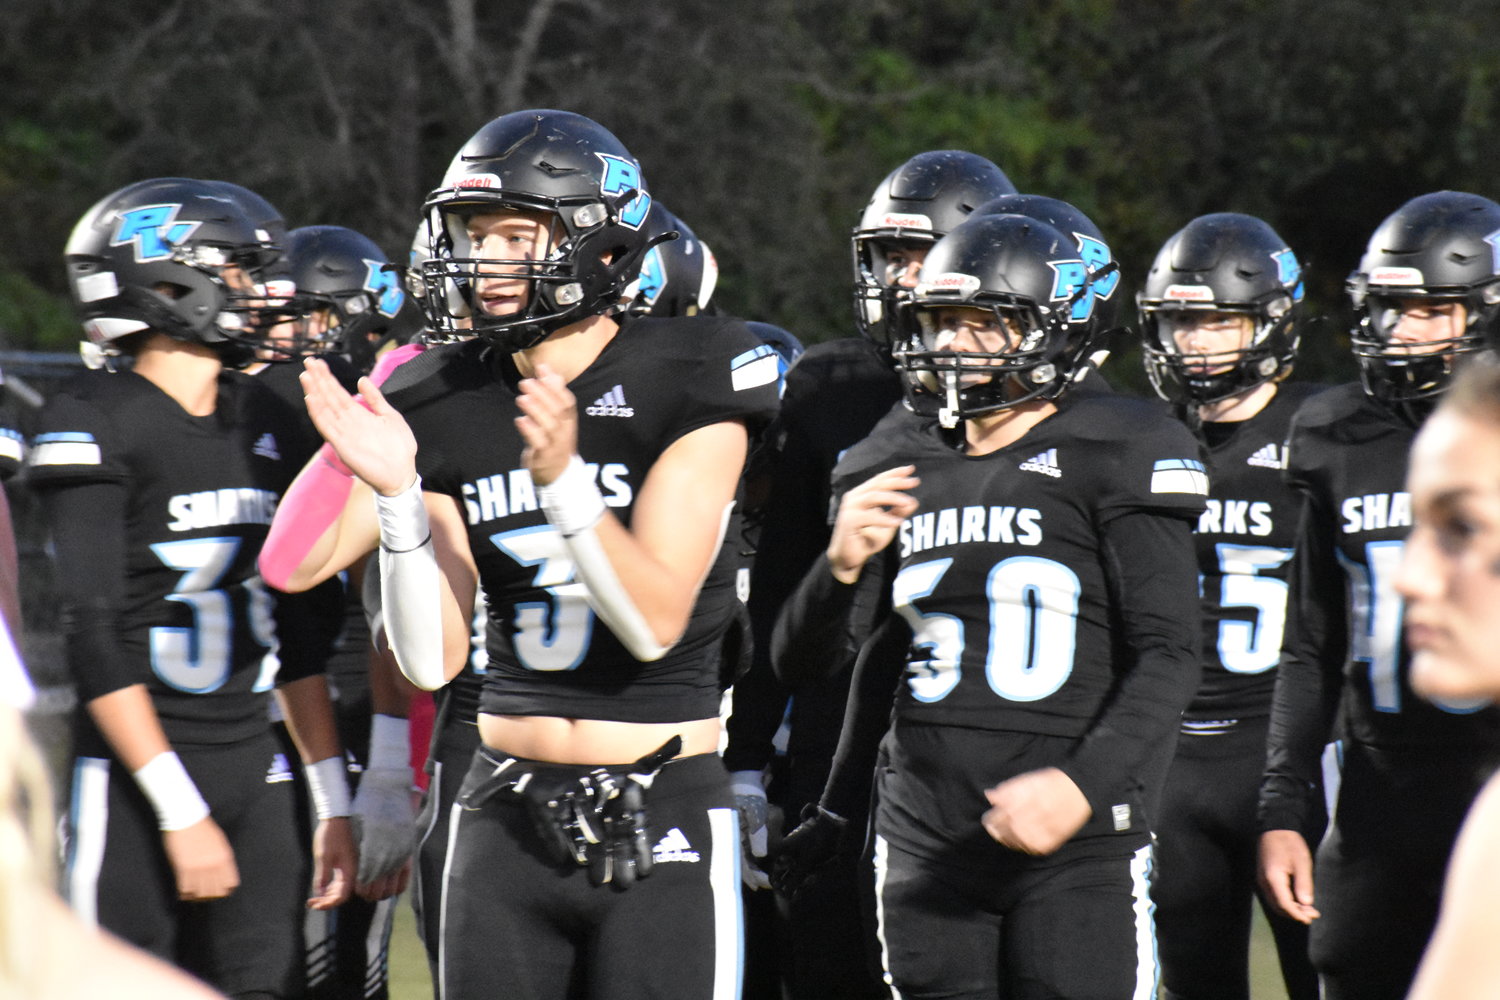 Nate Bunkosky (No. 3) and the rest of the Sharks are ready to renew their annual rivalry against Nease.